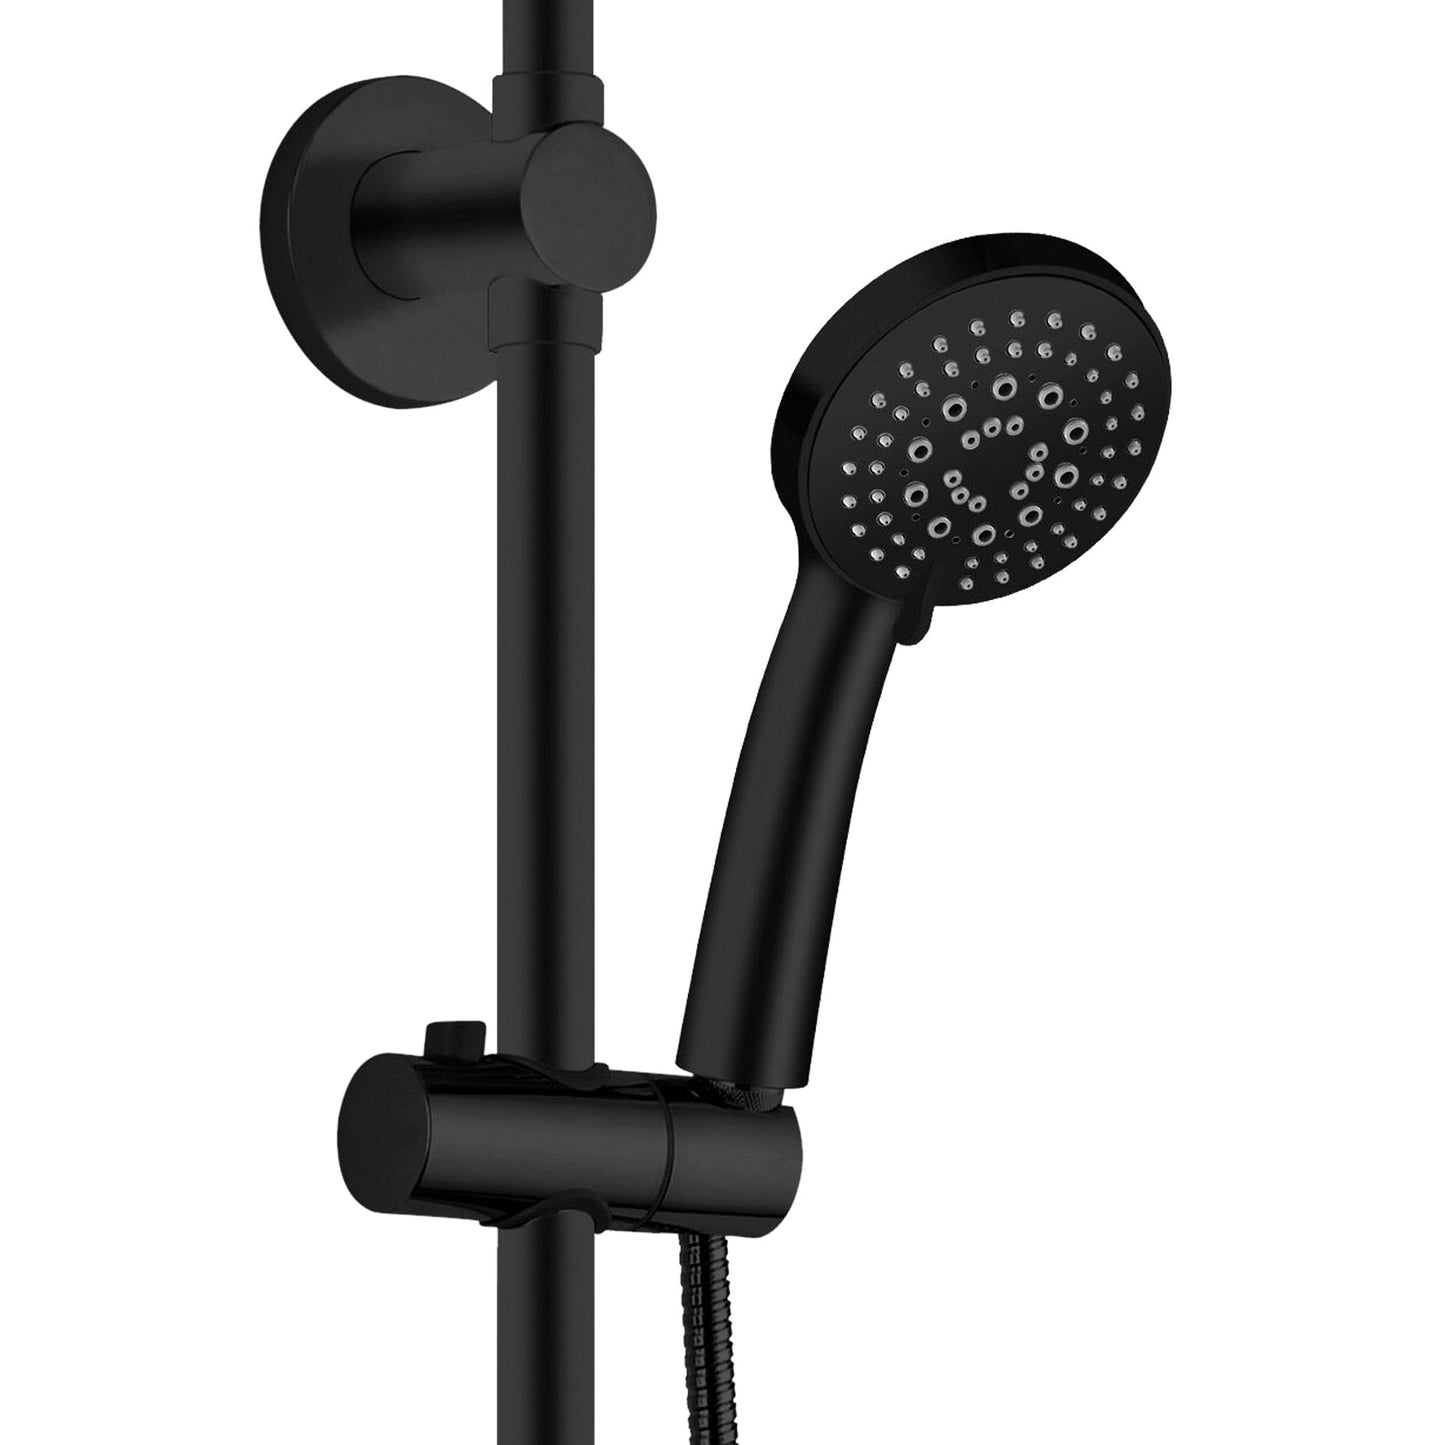 PULSE ShowerSpas Lanai 2.5 GPM Shower System in Matte Black Finish With 3-Power Spray Body Jet and 3-Function Hand Shower